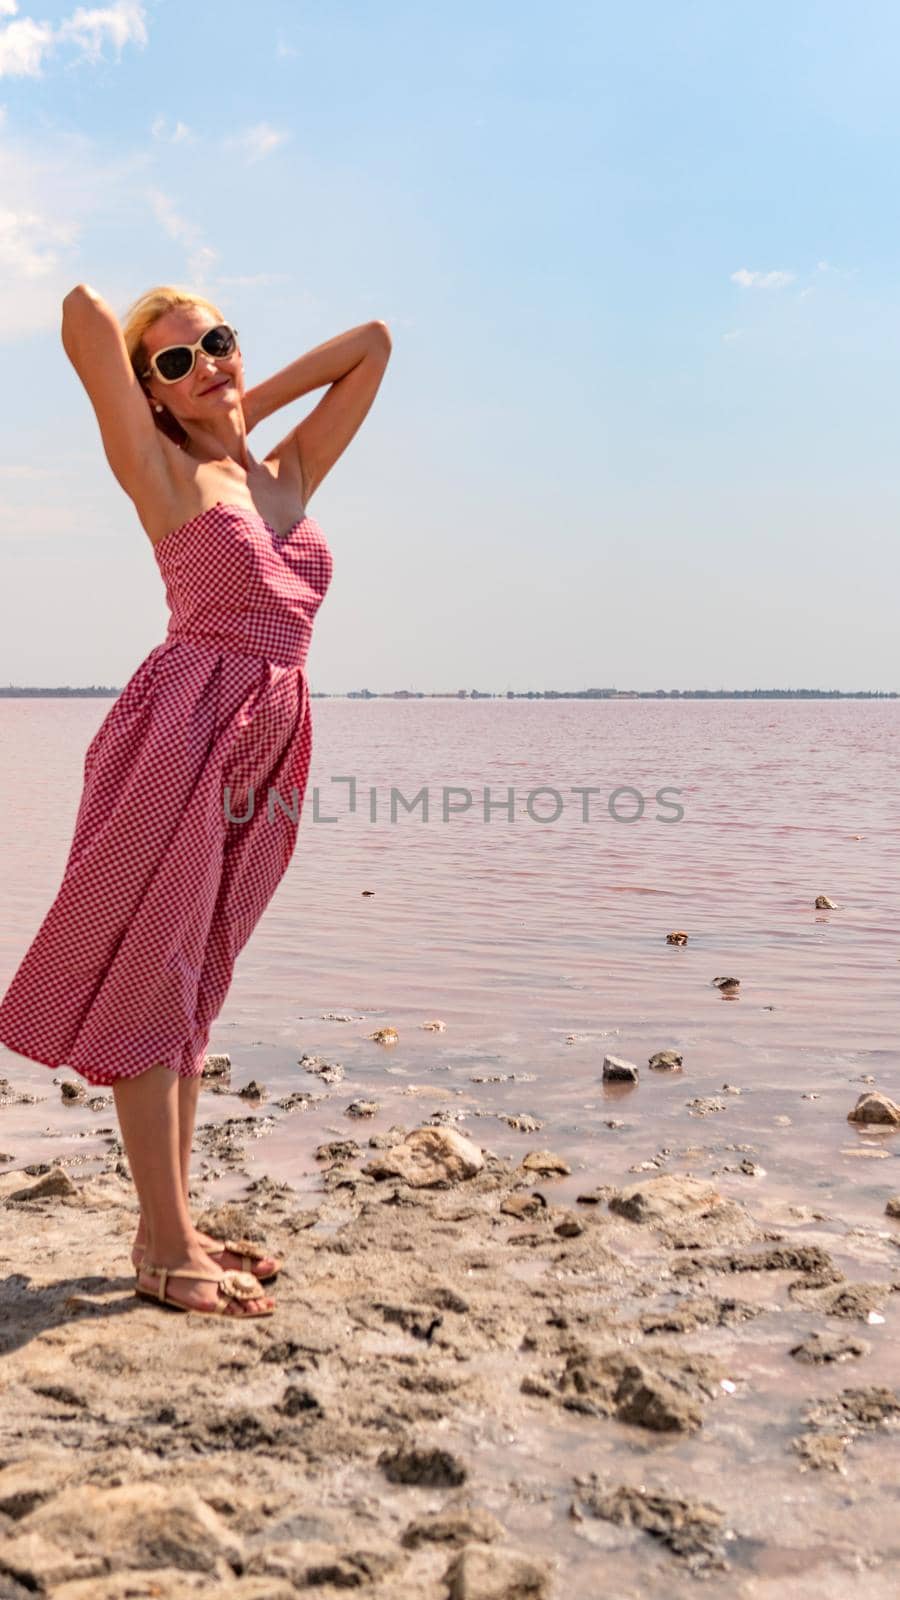 Cheerful lady in a red dress young smiling at the camera against the background of a red lake with blue clouds in hot sunny weather